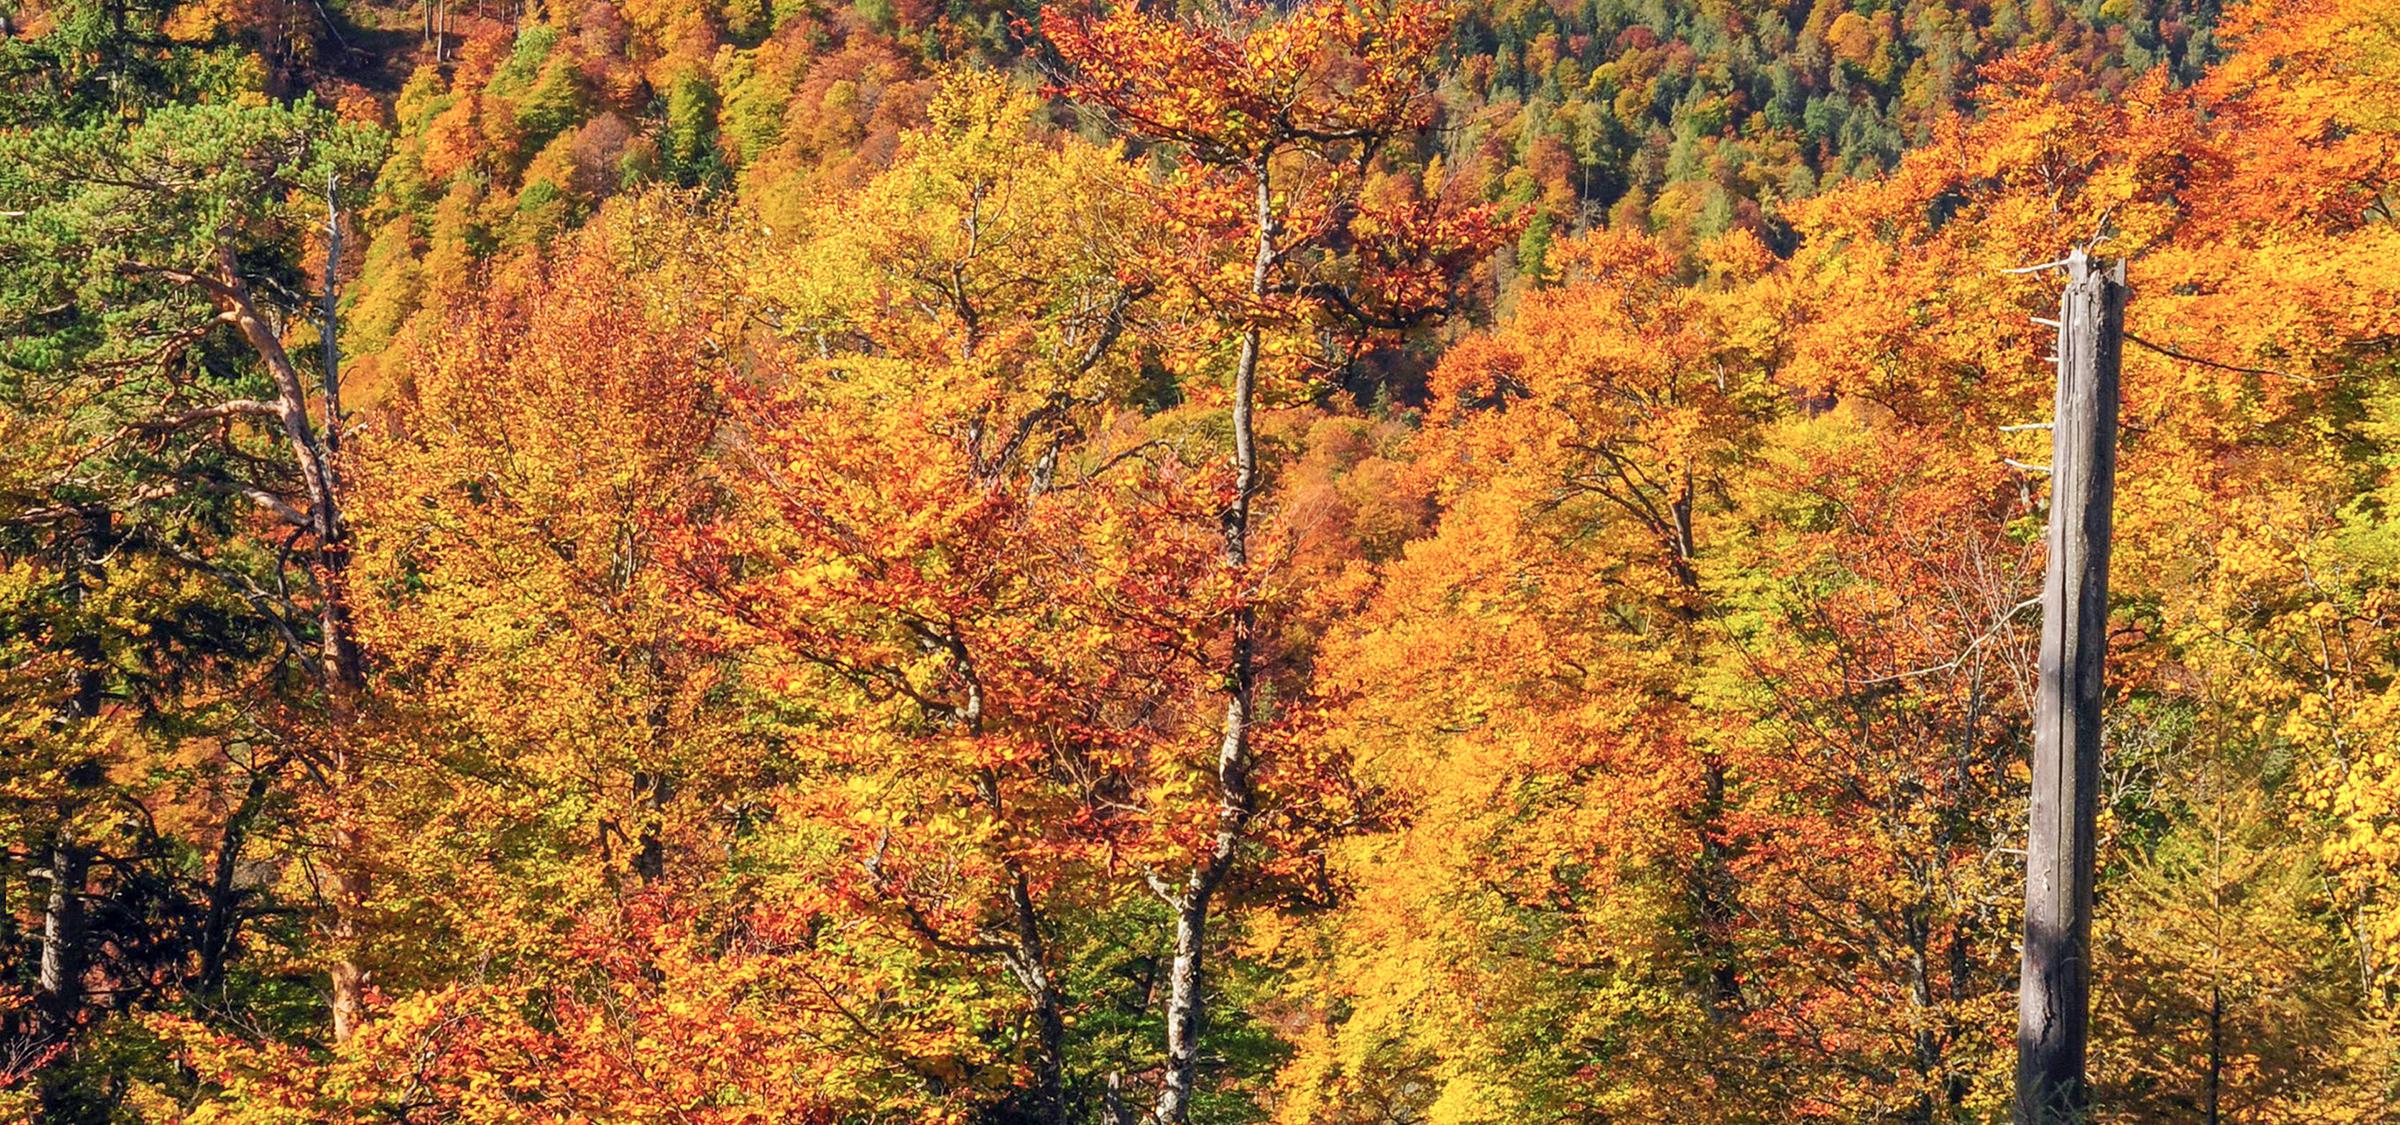 Forest wilderness at Kalkalpen National Park with autumn-colored beech trees